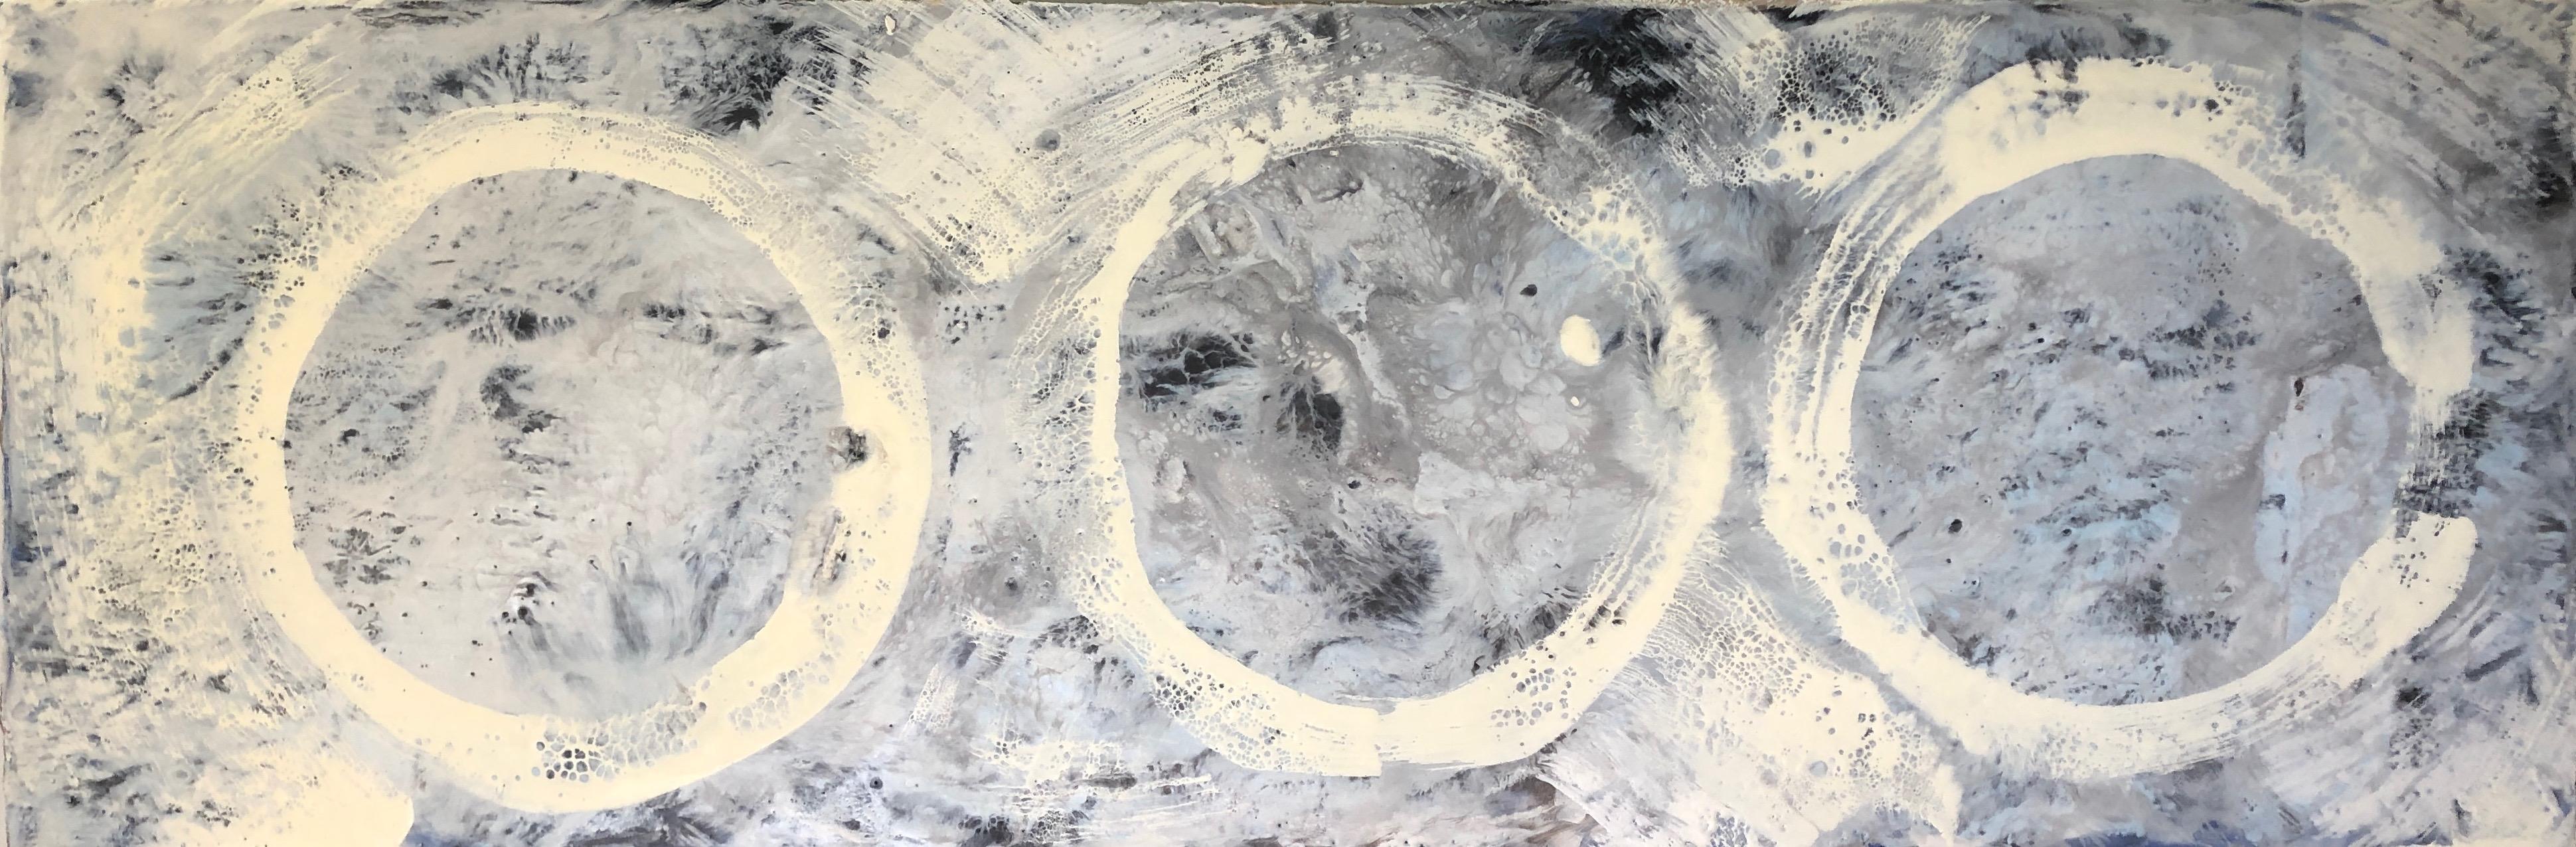 Series: Triple Moon

Oil and encaustic

Size: 12" x 36" x 2" 

Using unconventional hardware - a blow torch, iron and other heated tools - along with paper, encaustics, photography, resin and natural materials, Bonfils’ uncommon painting and